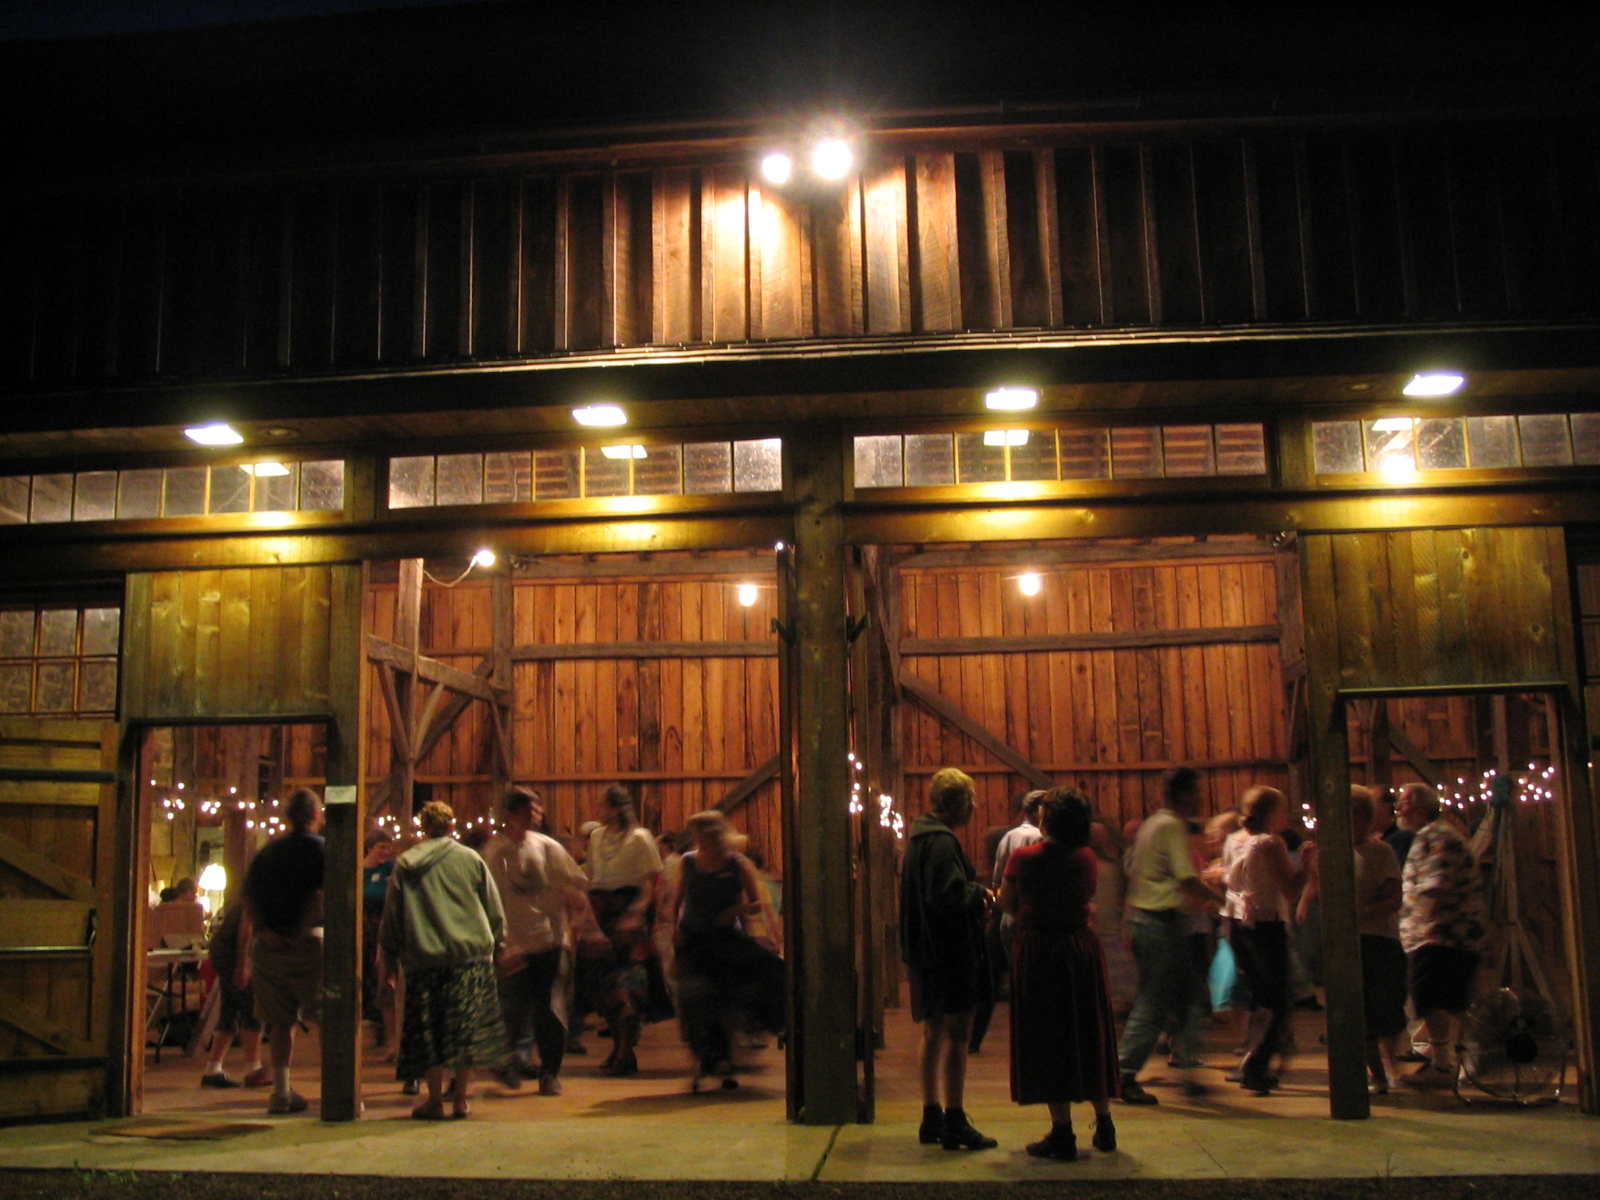 People dancing in a barn at night.